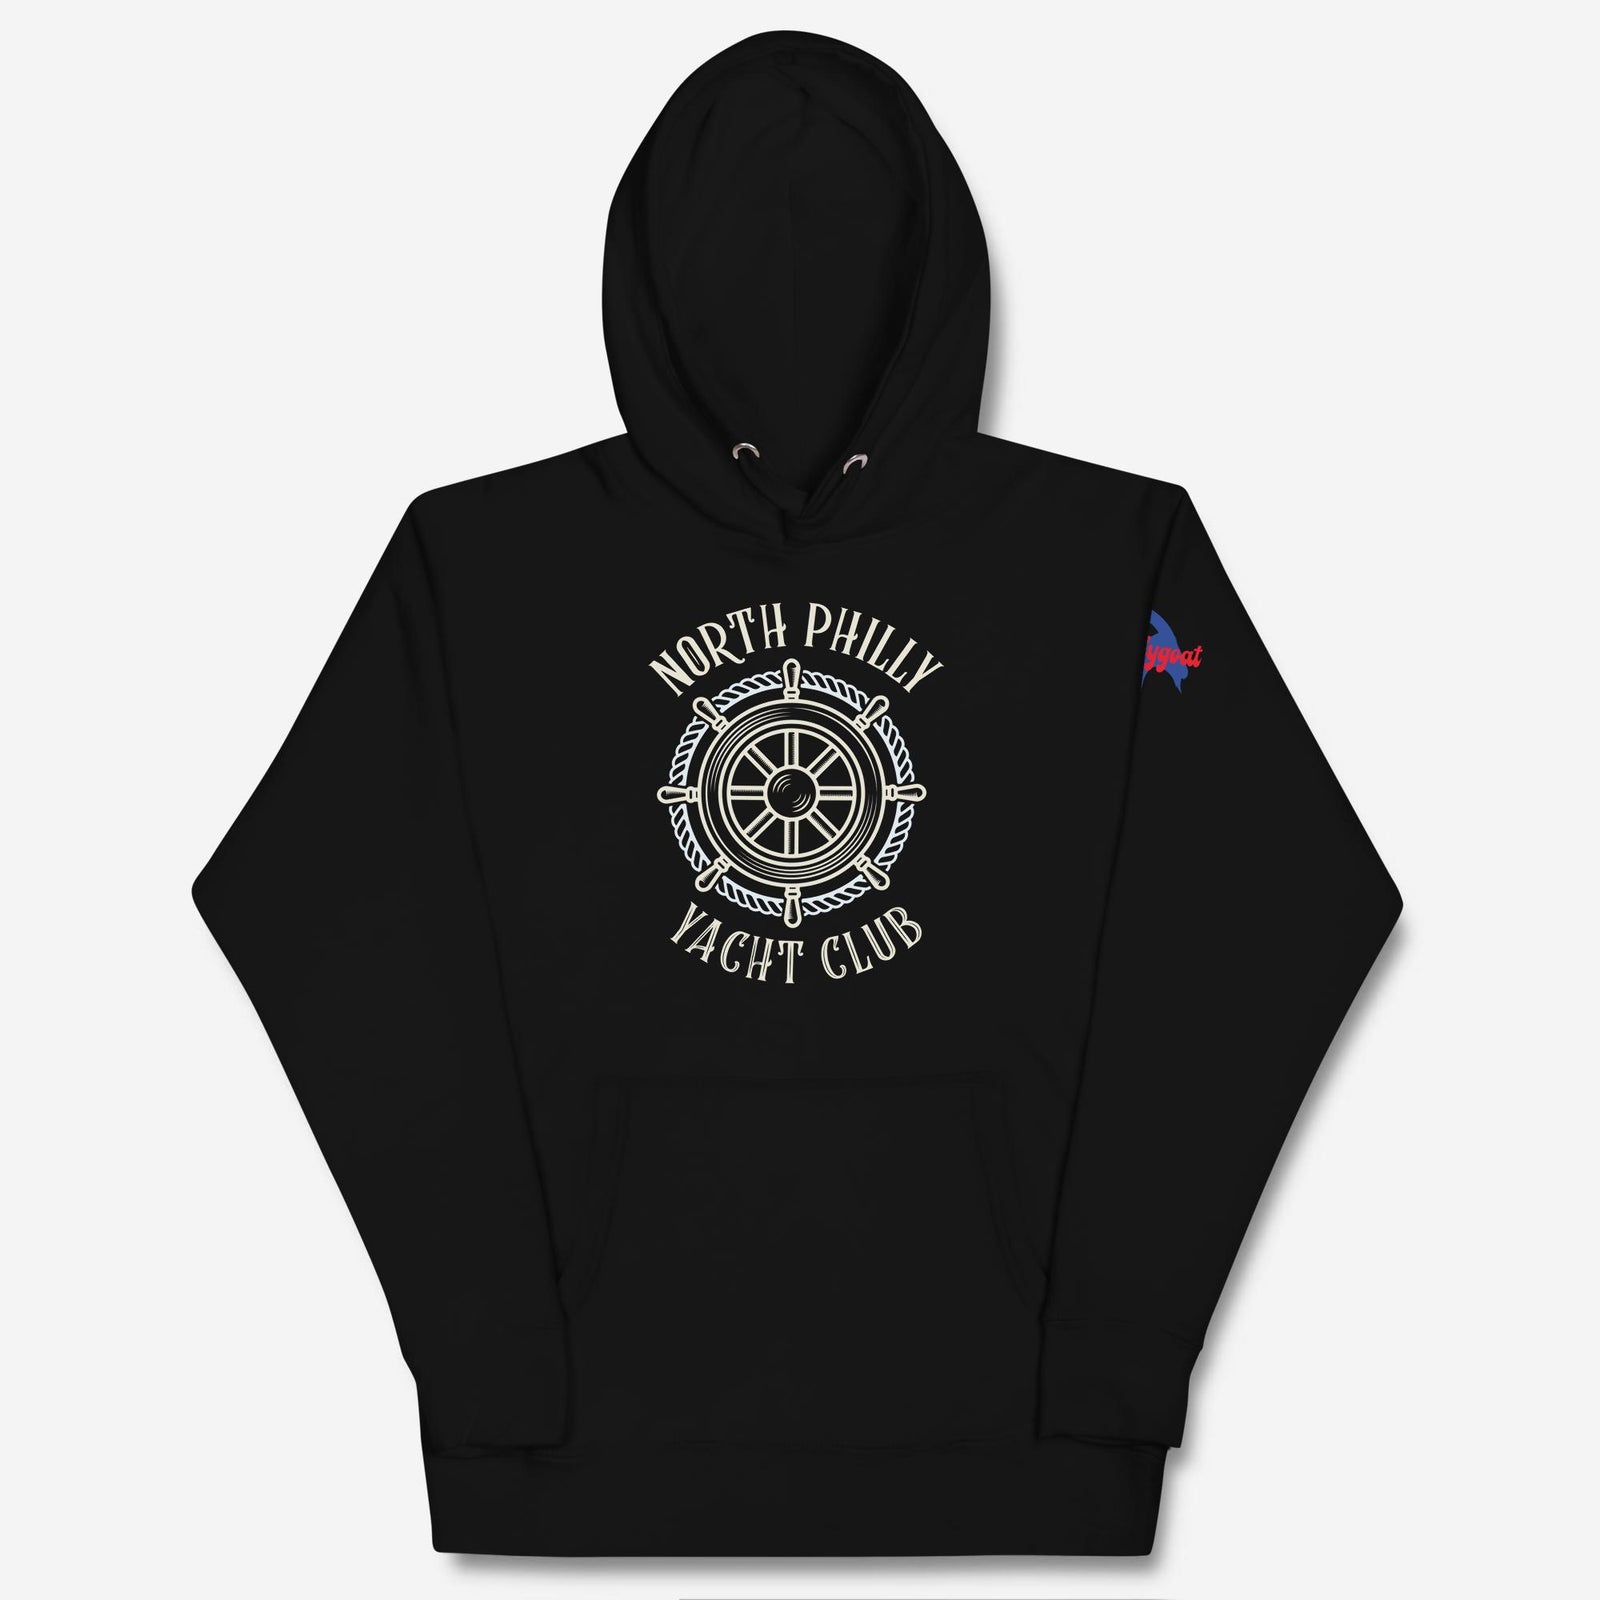 "North Philly Yacht Club" Hoodie